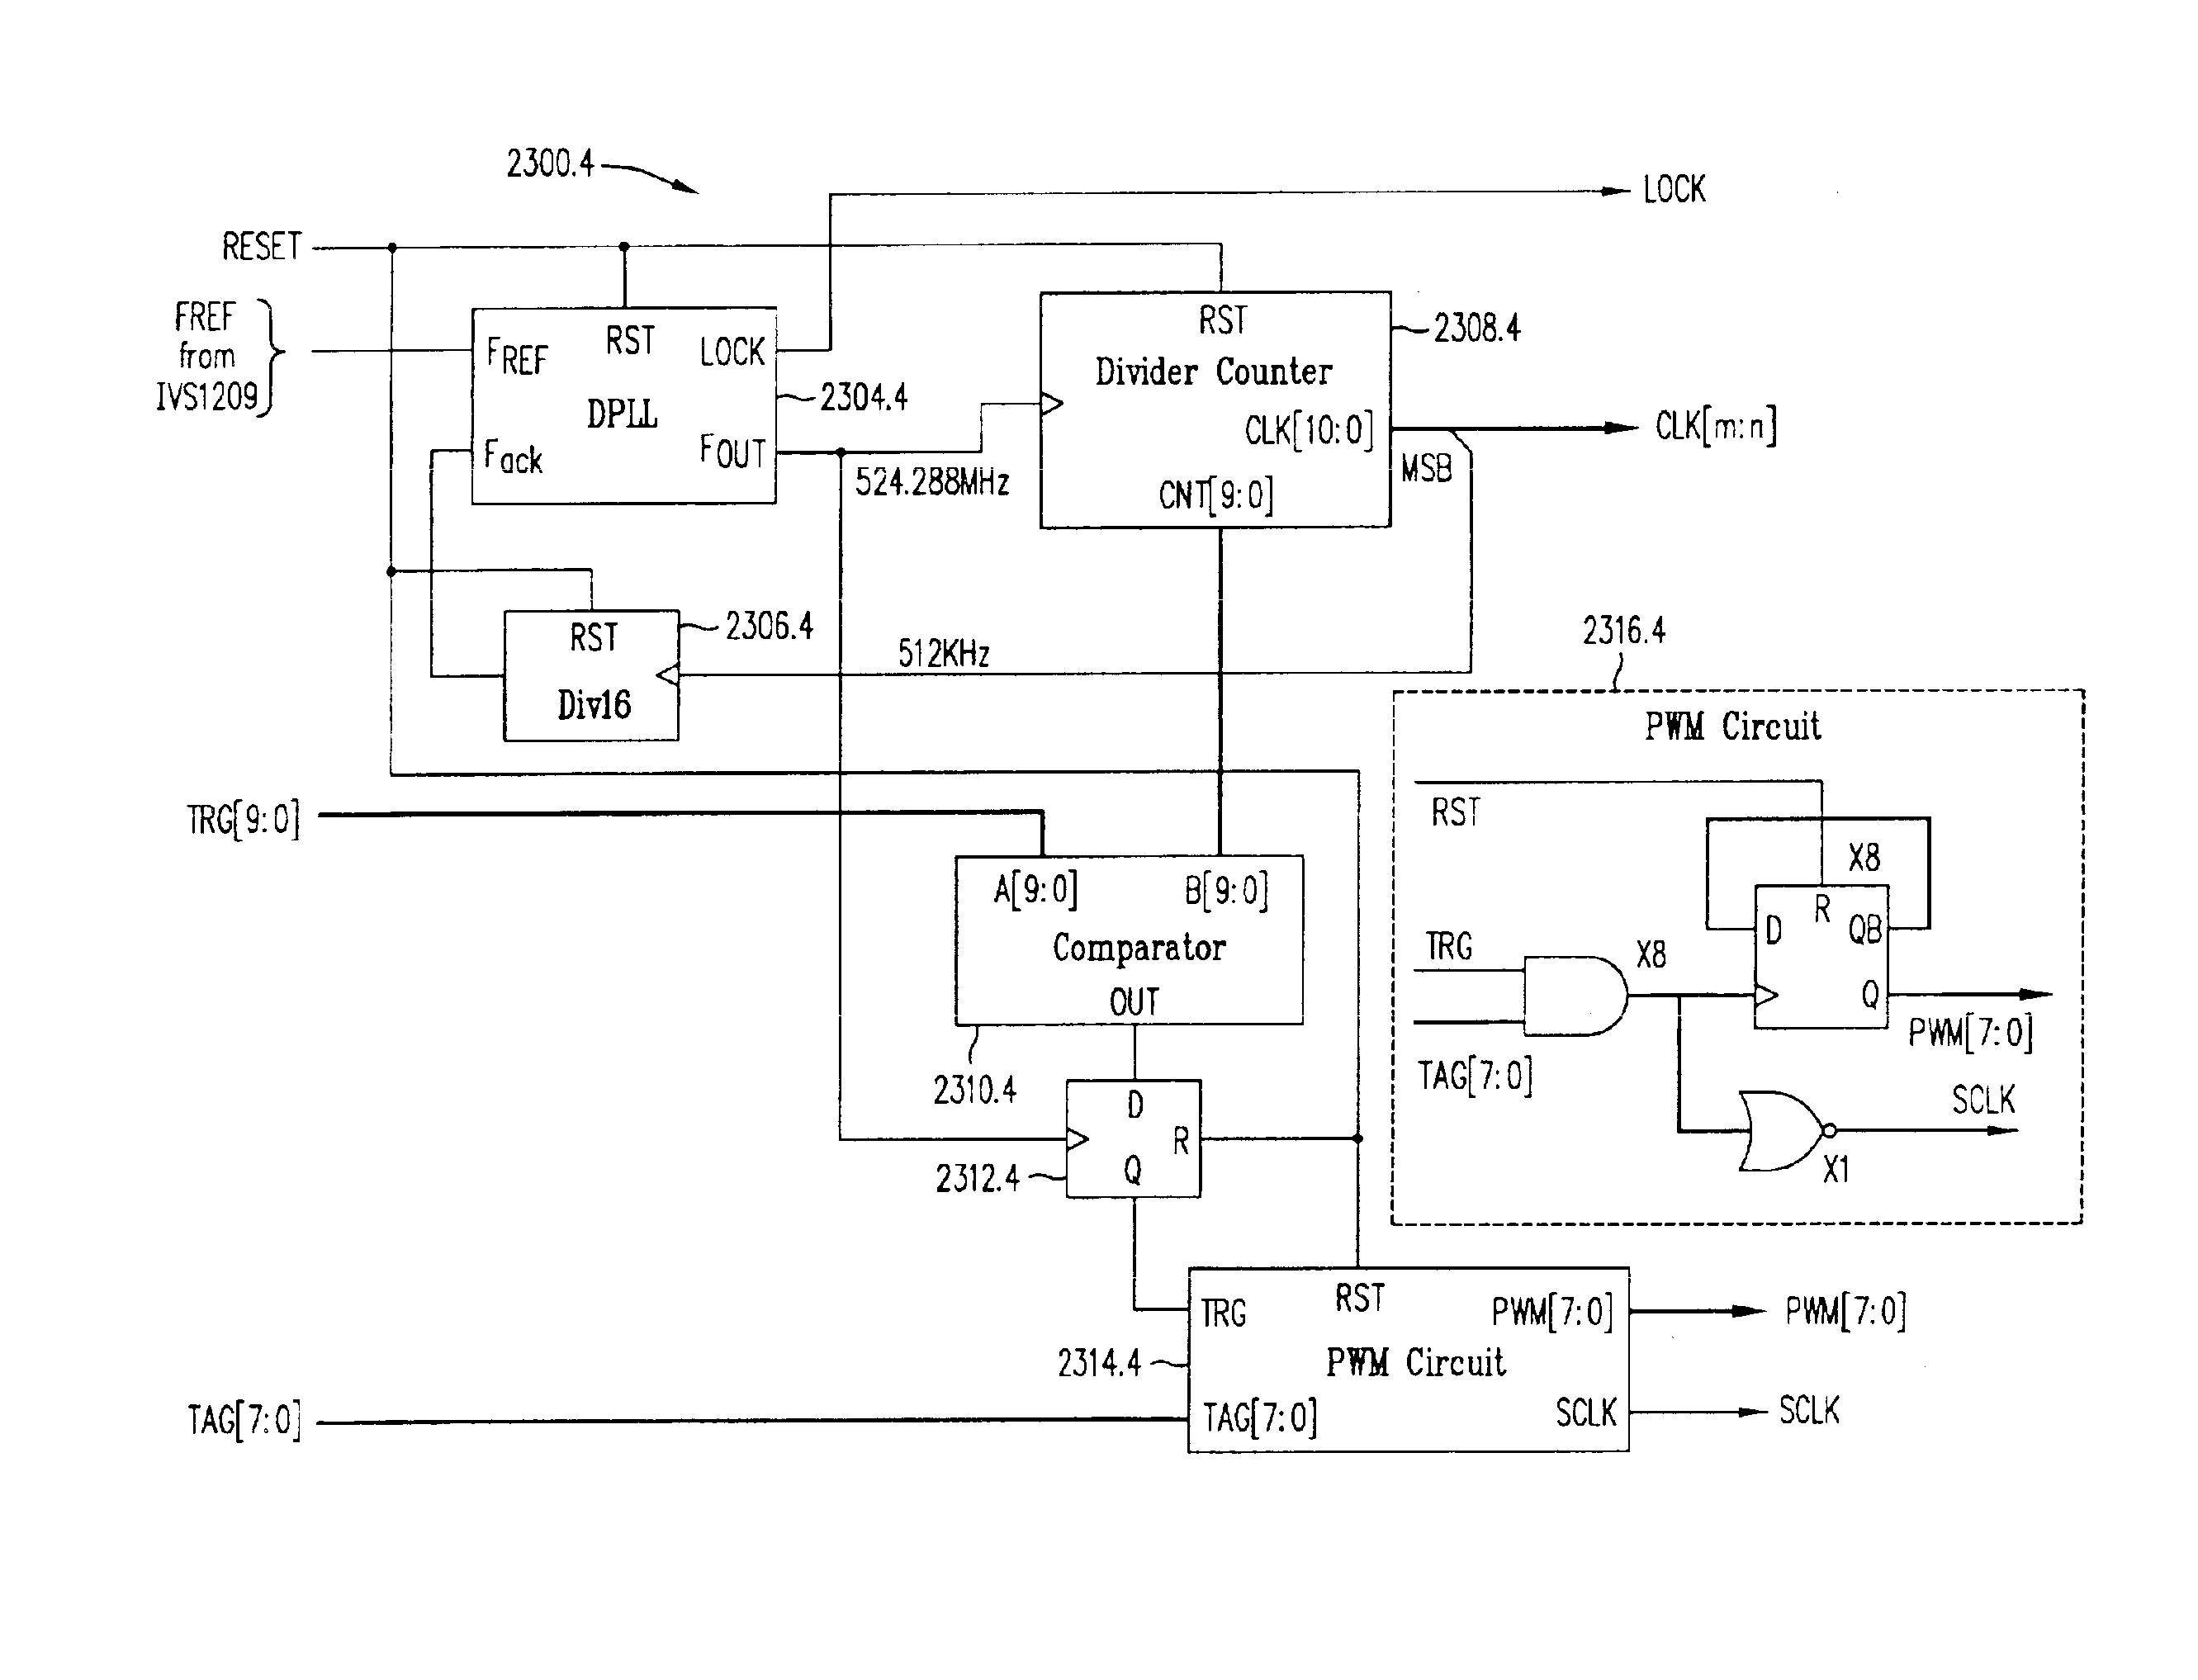 Multi-channel control methods for switched power converters